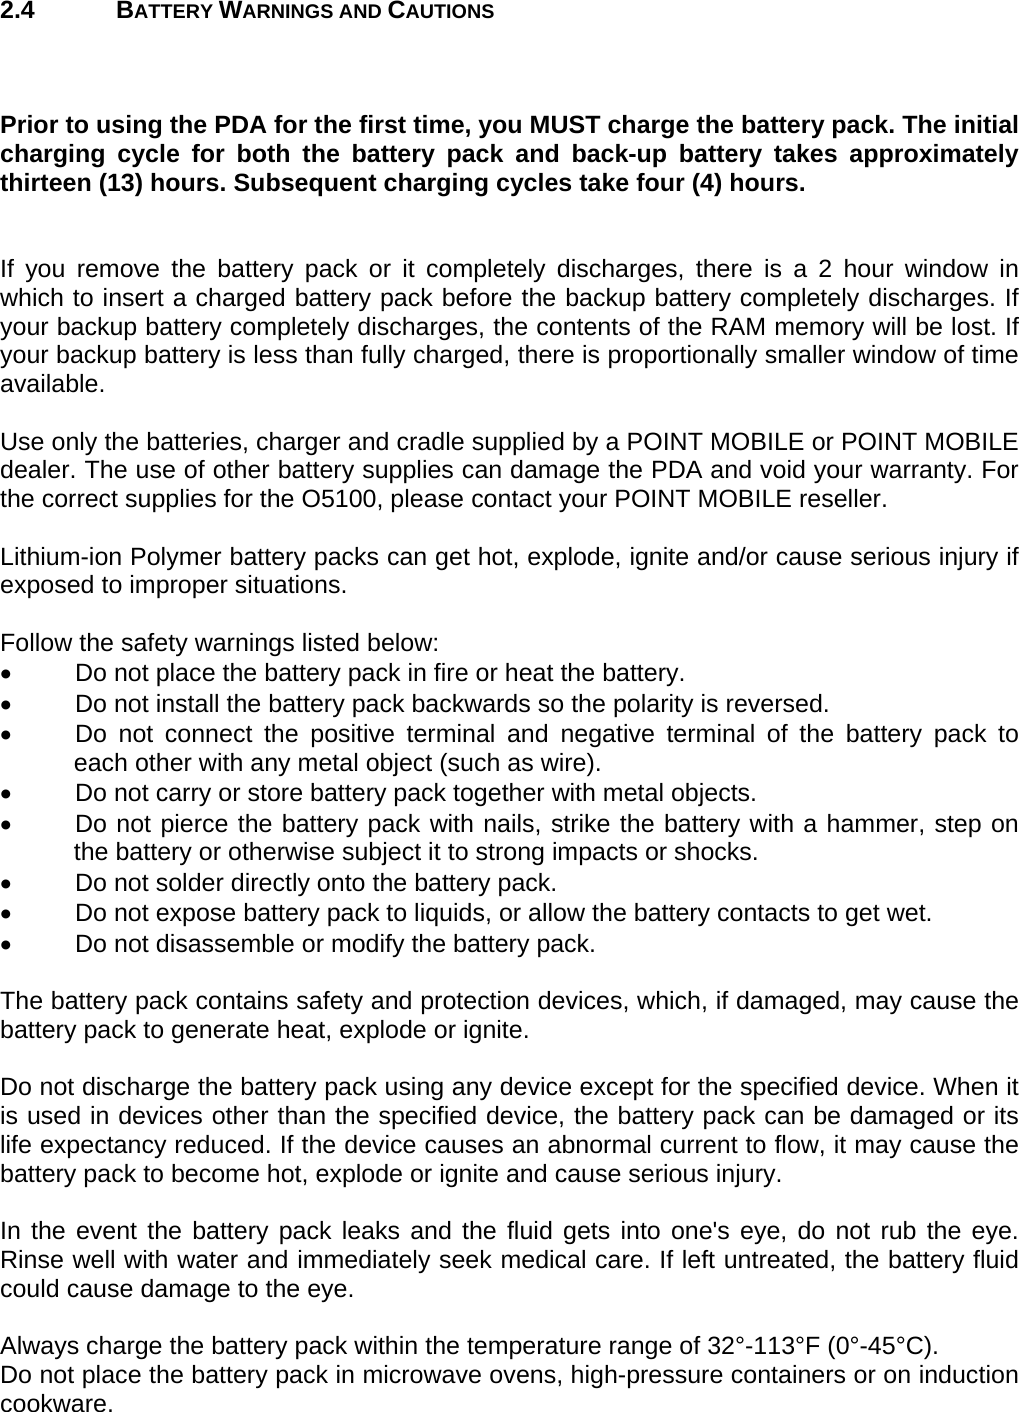 User manual  O5100 © All rights reserved. HONEYWELL     7  2.4 BATTERY WARNINGS AND CAUTIONS    Prior to using the PDA for the first time, you MUST charge the battery pack. The initial charging cycle for both the battery pack and back-up battery takes approximately thirteen (13) hours. Subsequent charging cycles take four (4) hours.   If you remove the battery pack or it completely discharges, there is a 2 hour window in which to insert a charged battery pack before the backup battery completely discharges. If your backup battery completely discharges, the contents of the RAM memory will be lost. If your backup battery is less than fully charged, there is proportionally smaller window of time available.  Use only the batteries, charger and cradle supplied by a POINT MOBILE or POINT MOBILE dealer. The use of other battery supplies can damage the PDA and void your warranty. For the correct supplies for the O5100, please contact your POINT MOBILE reseller.  Lithium-ion Polymer battery packs can get hot, explode, ignite and/or cause serious injury if exposed to improper situations.   Follow the safety warnings listed below:   Do not place the battery pack in fire or heat the battery.   Do not install the battery pack backwards so the polarity is reversed.   Do not connect the positive terminal and negative terminal of the battery pack to each other with any metal object (such as wire).   Do not carry or store battery pack together with metal objects.   Do not pierce the battery pack with nails, strike the battery with a hammer, step on the battery or otherwise subject it to strong impacts or shocks.   Do not solder directly onto the battery pack.   Do not expose battery pack to liquids, or allow the battery contacts to get wet.   Do not disassemble or modify the battery pack.   The battery pack contains safety and protection devices, which, if damaged, may cause the battery pack to generate heat, explode or ignite.  Do not discharge the battery pack using any device except for the specified device. When it is used in devices other than the specified device, the battery pack can be damaged or its life expectancy reduced. If the device causes an abnormal current to flow, it may cause the battery pack to become hot, explode or ignite and cause serious injury.  In the event the battery pack leaks and the fluid gets into one&apos;s eye, do not rub the eye. Rinse well with water and immediately seek medical care. If left untreated, the battery fluid could cause damage to the eye.  Always charge the battery pack within the temperature range of 32°-113°F (0°-45°C). Do not place the battery pack in microwave ovens, high-pressure containers or on induction cookware.  